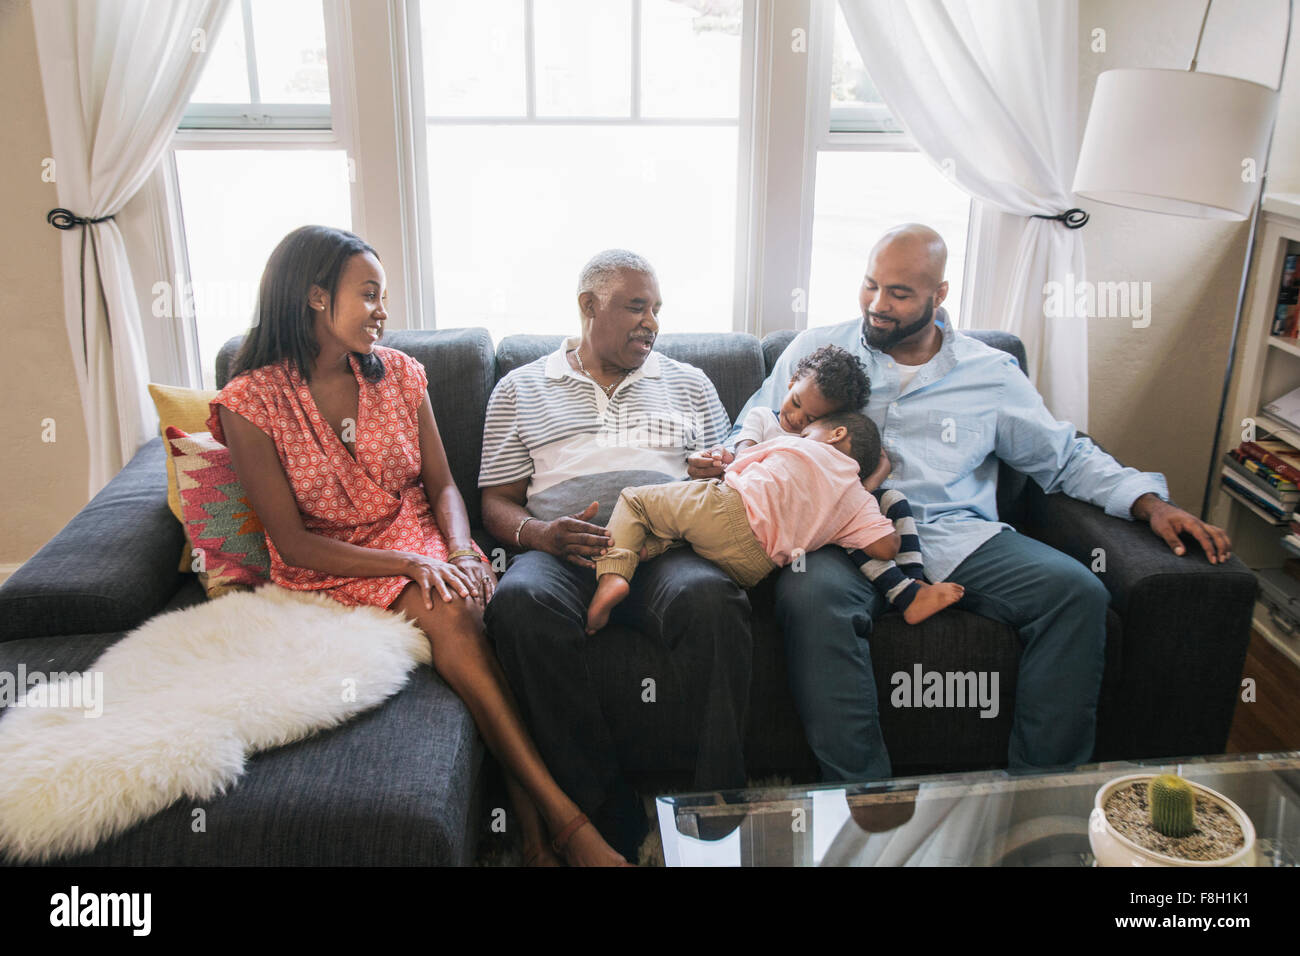 African American family relaxing on sofa Stock Photo